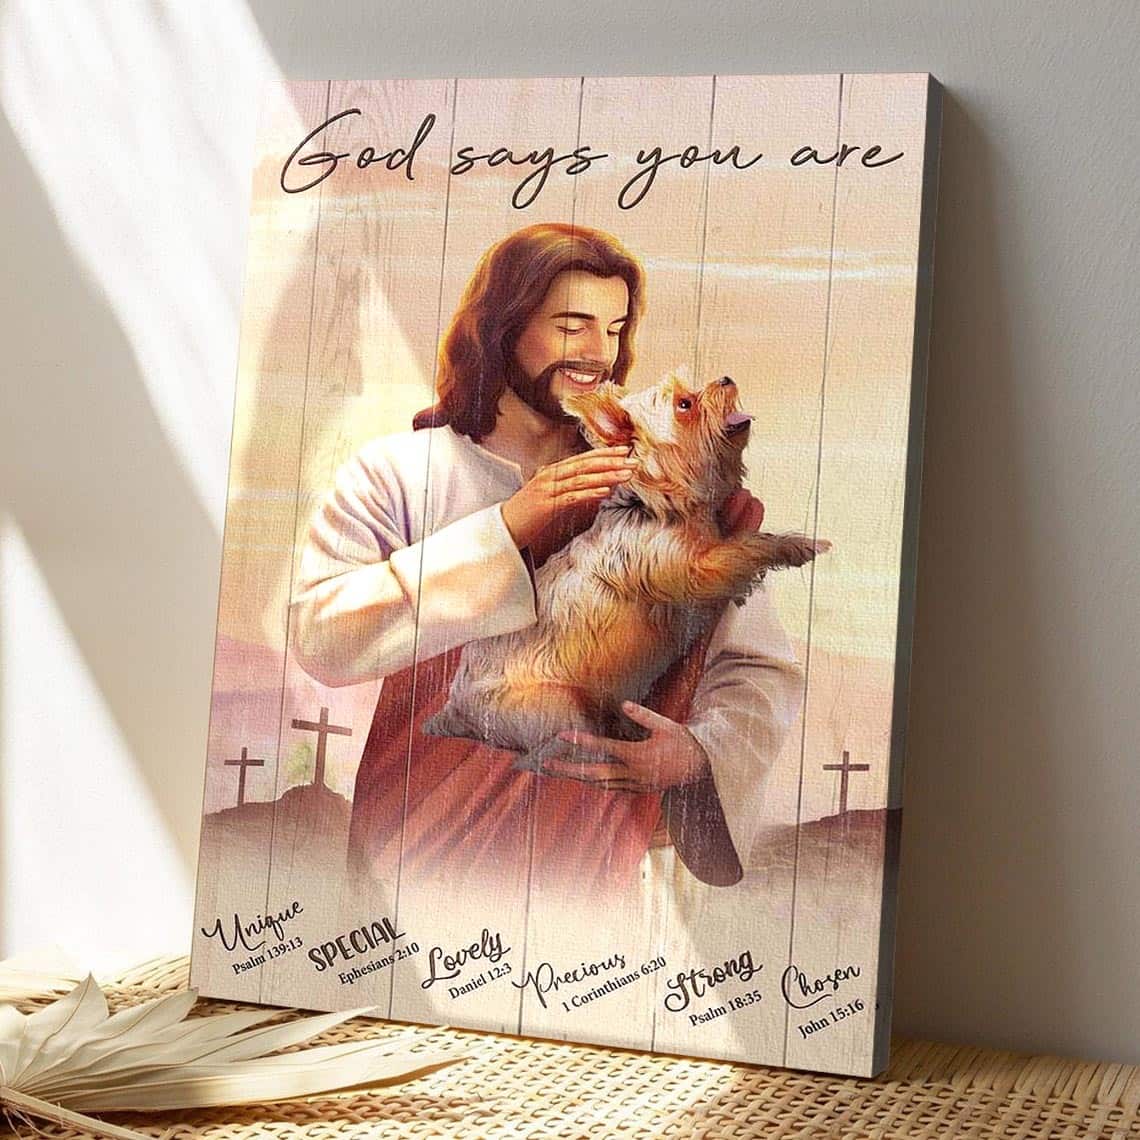 Jesus Hugging Yorkshire God Says You Are Bible Verse Canvas Print